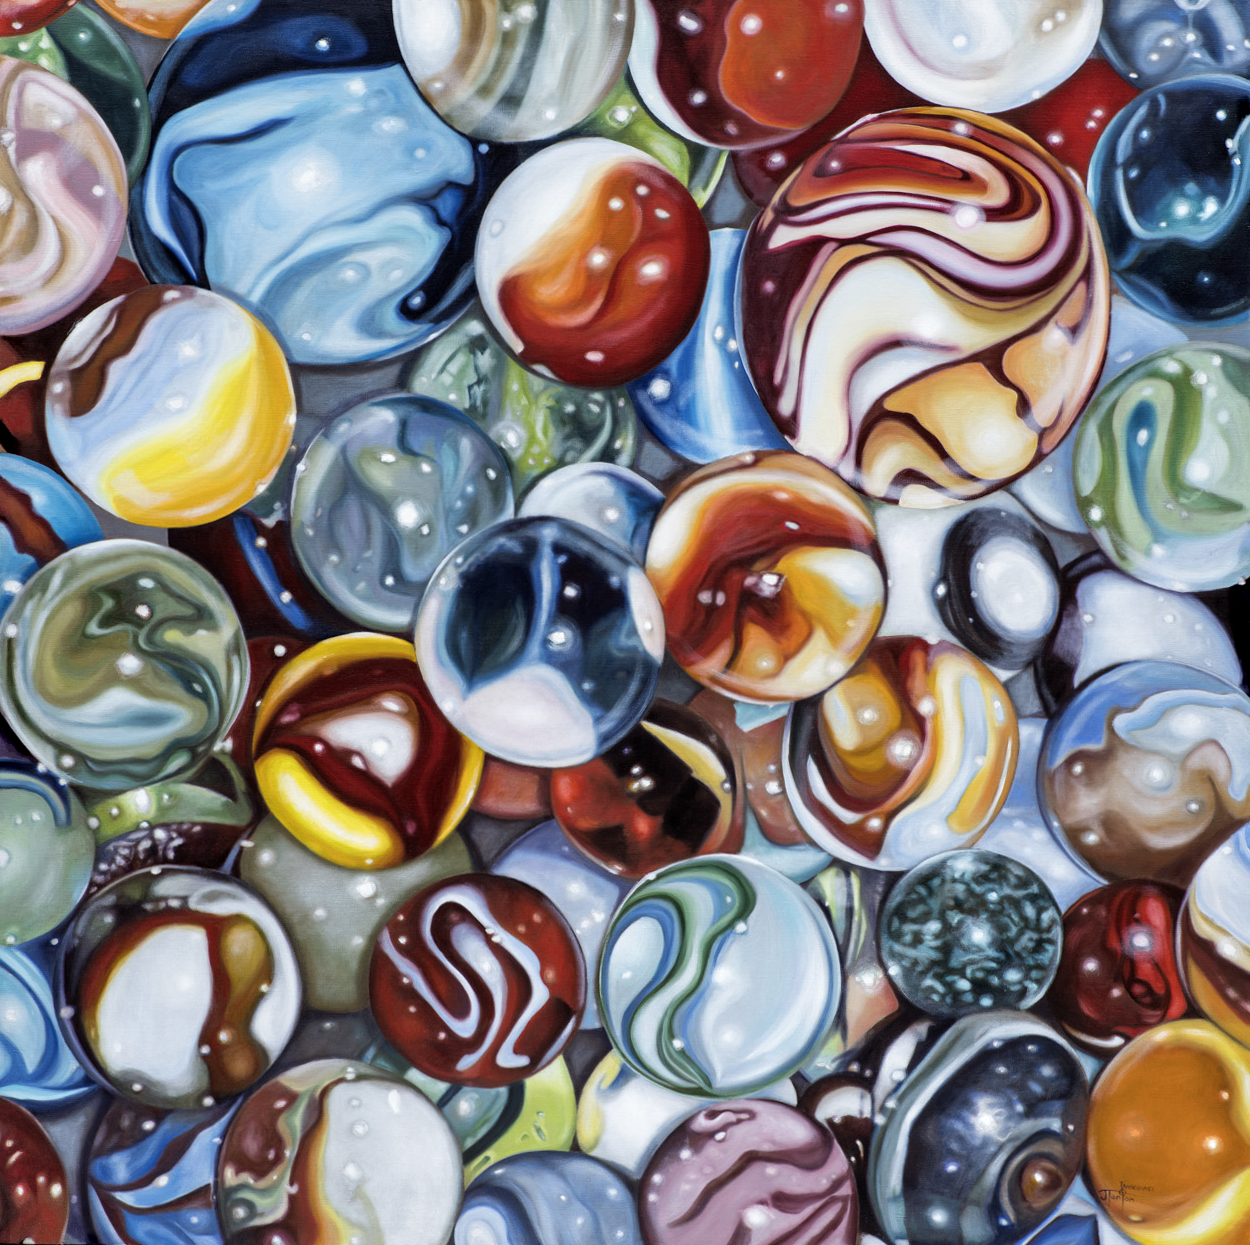 "Finding My Marbles" ©2019 Janice Tanton. Oil on linen, 48"x48"